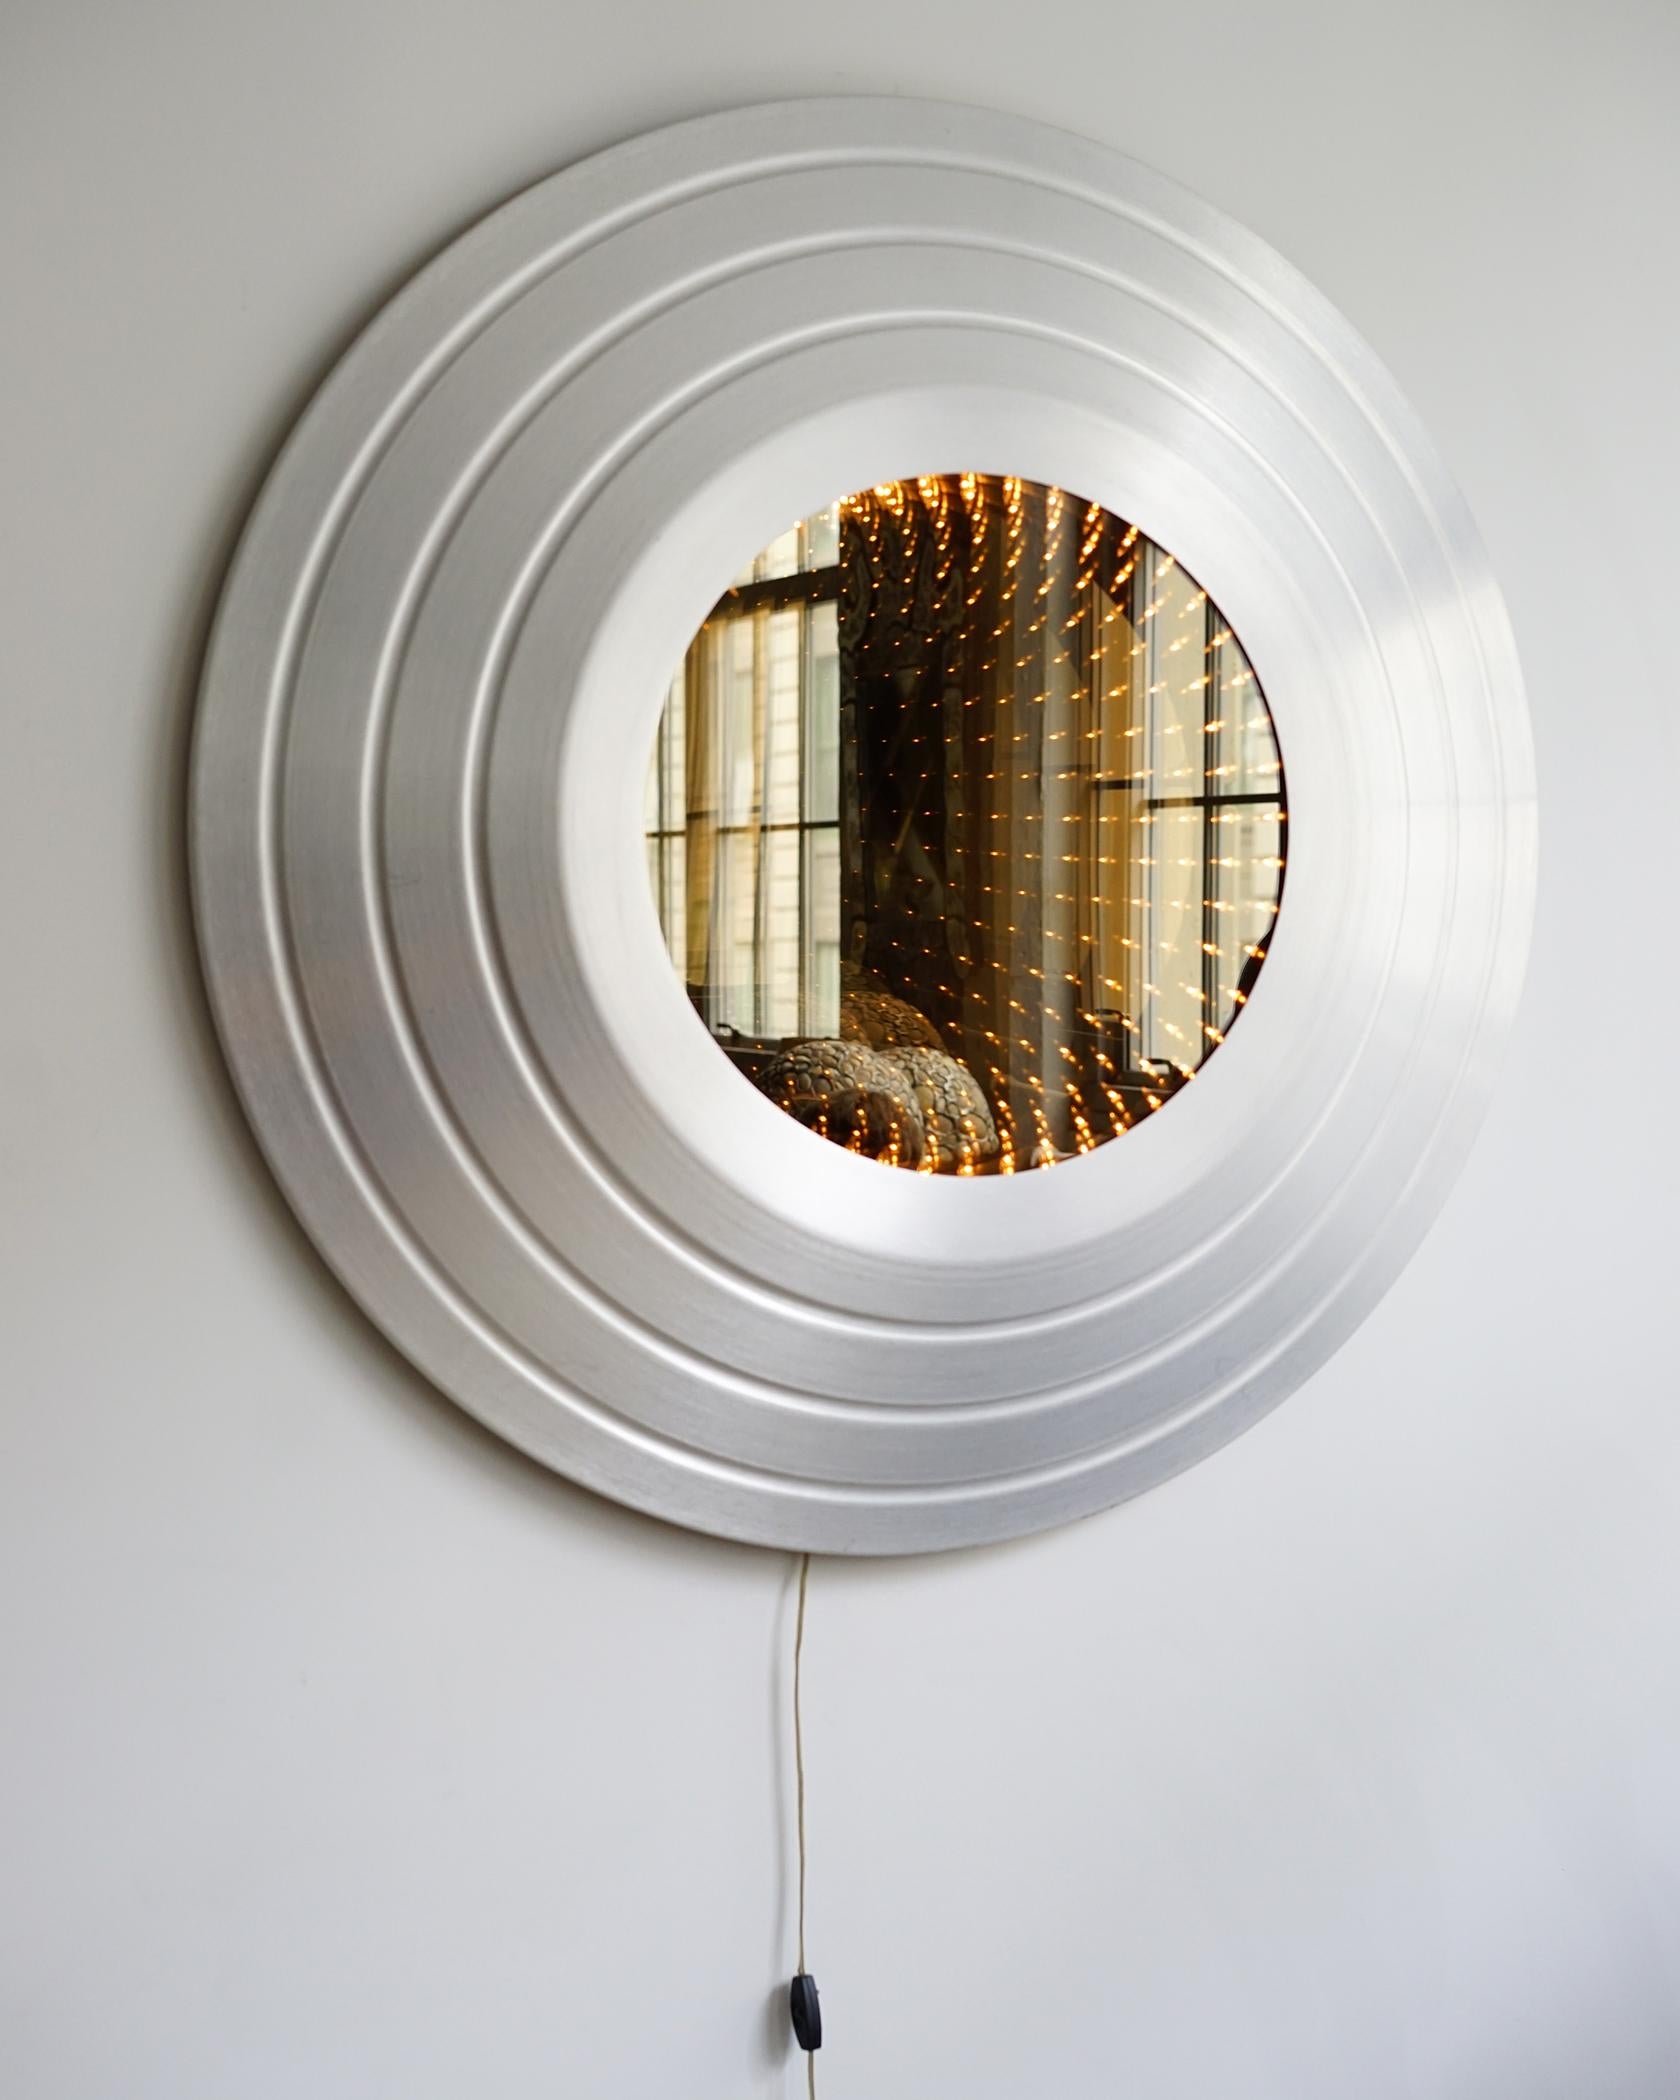 For your consideration is this vintage, all-original infinity mirror. The front glass is a two-way mirror behind which is a single ring of lights which itself is backed by an interior mirror. This creates the illusion of an infinite repetition of a